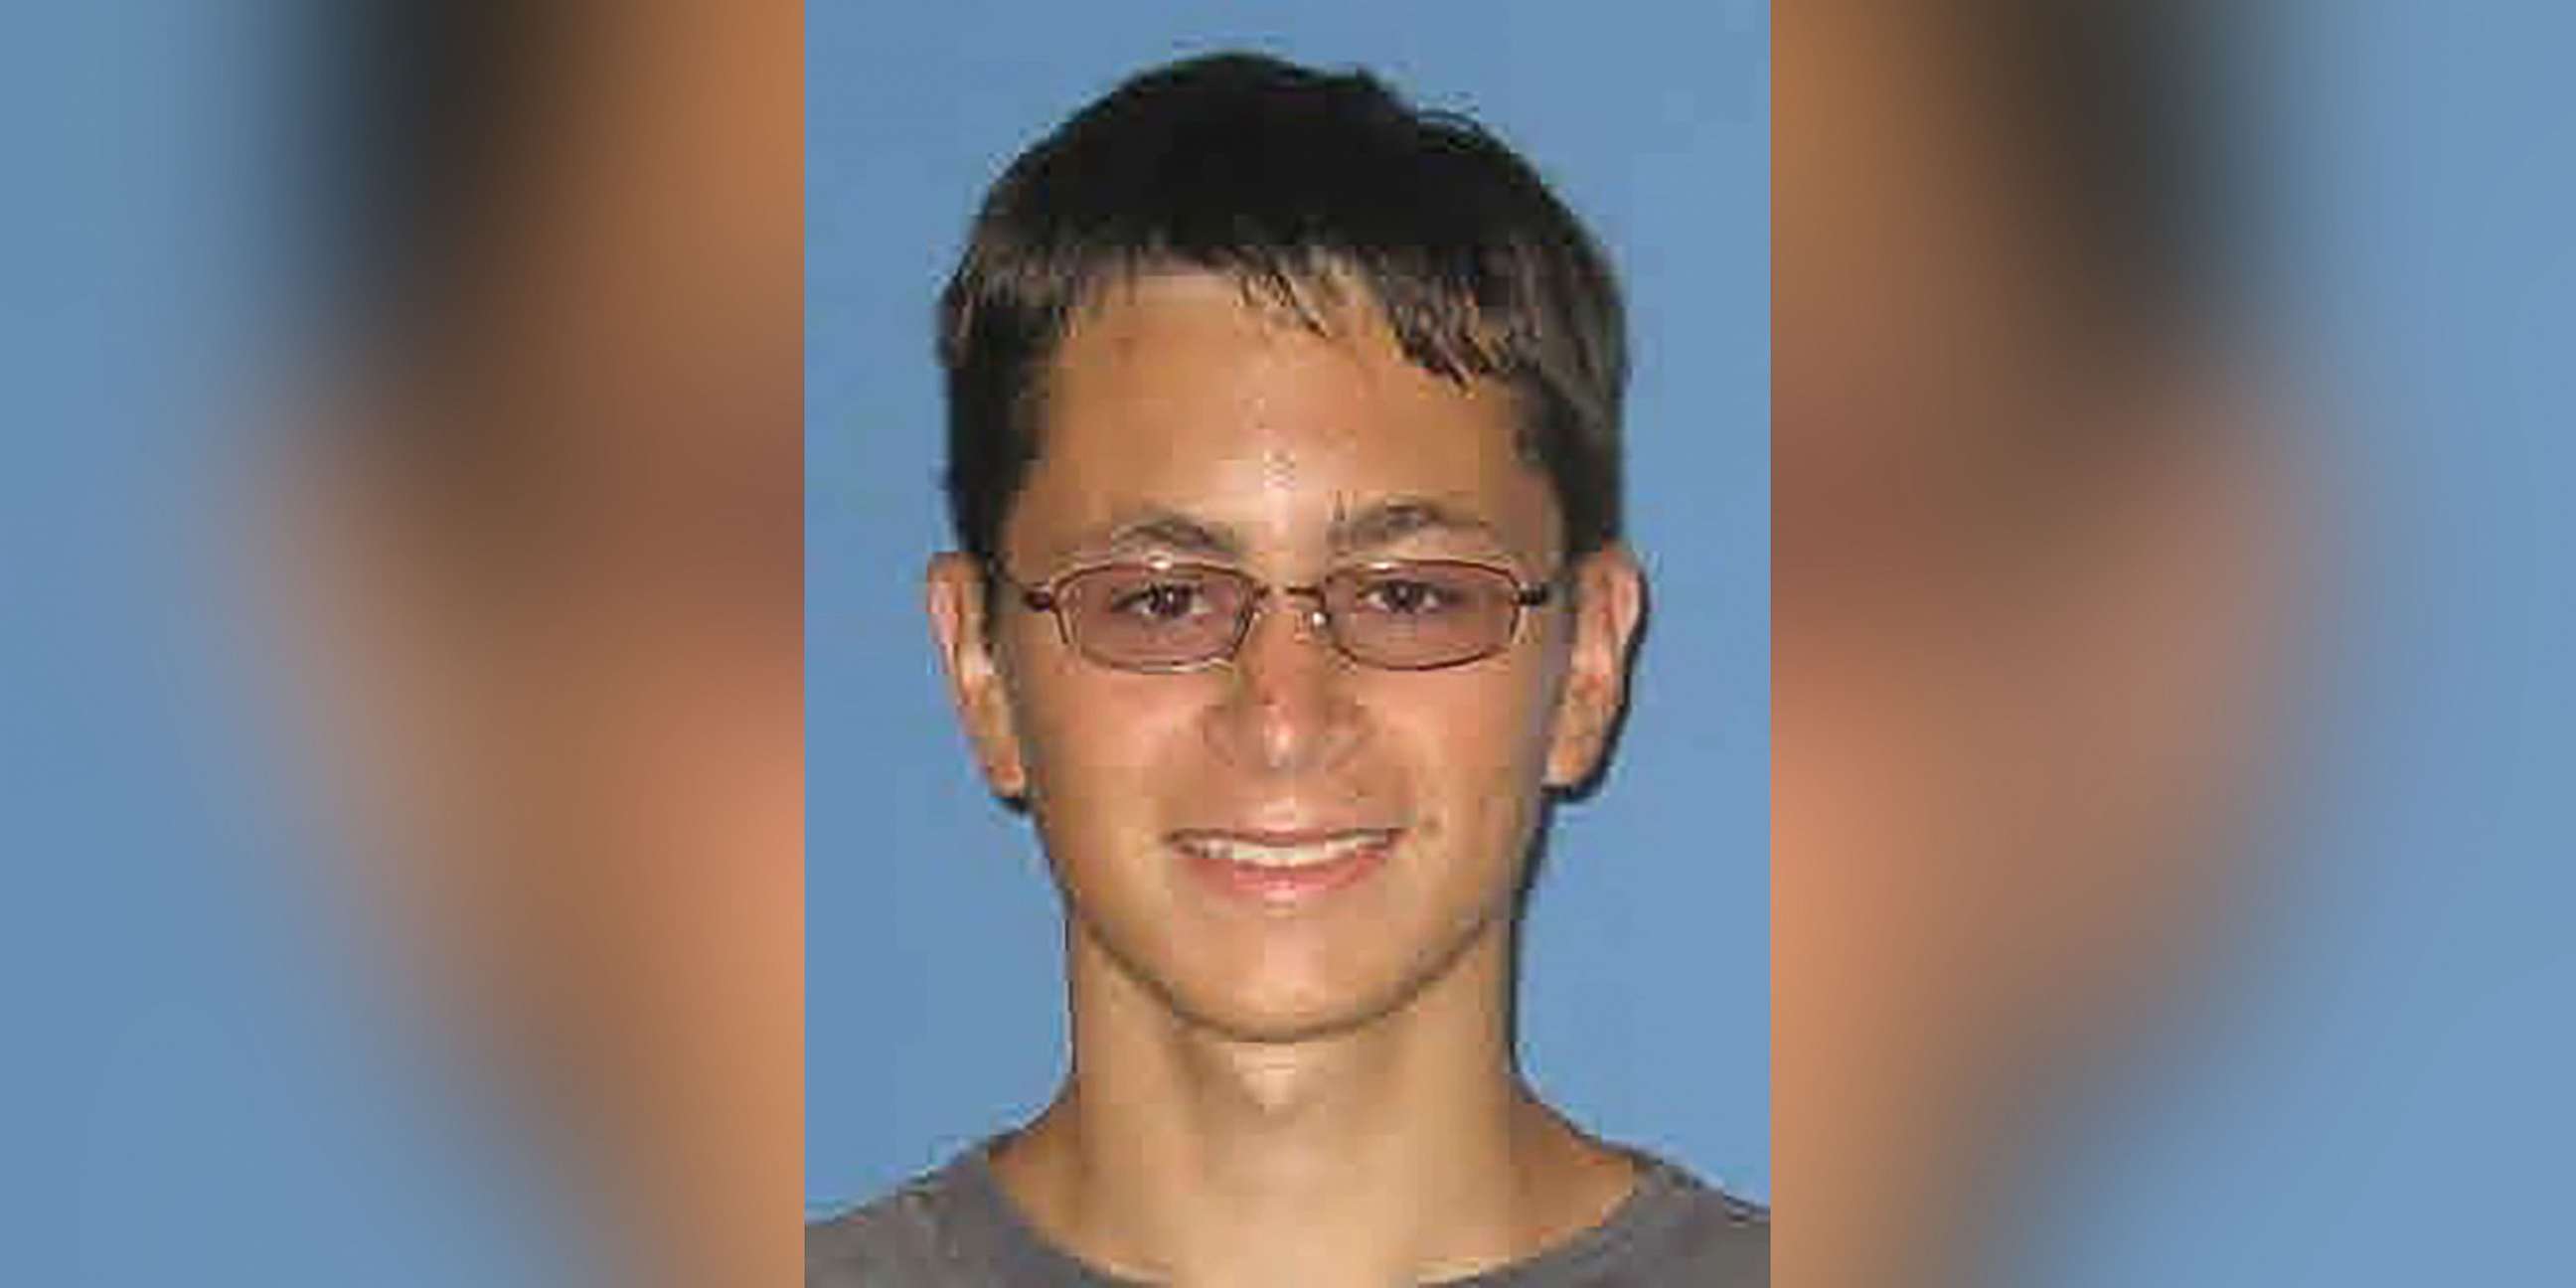 PHOTO: Suspect in a series of bombings around Austin, Texas, Mark Anthony Conditt, of Pflugerville, Texas, as seen in a photo released by Austin Community College where he was enrolled from  2010-2012. 